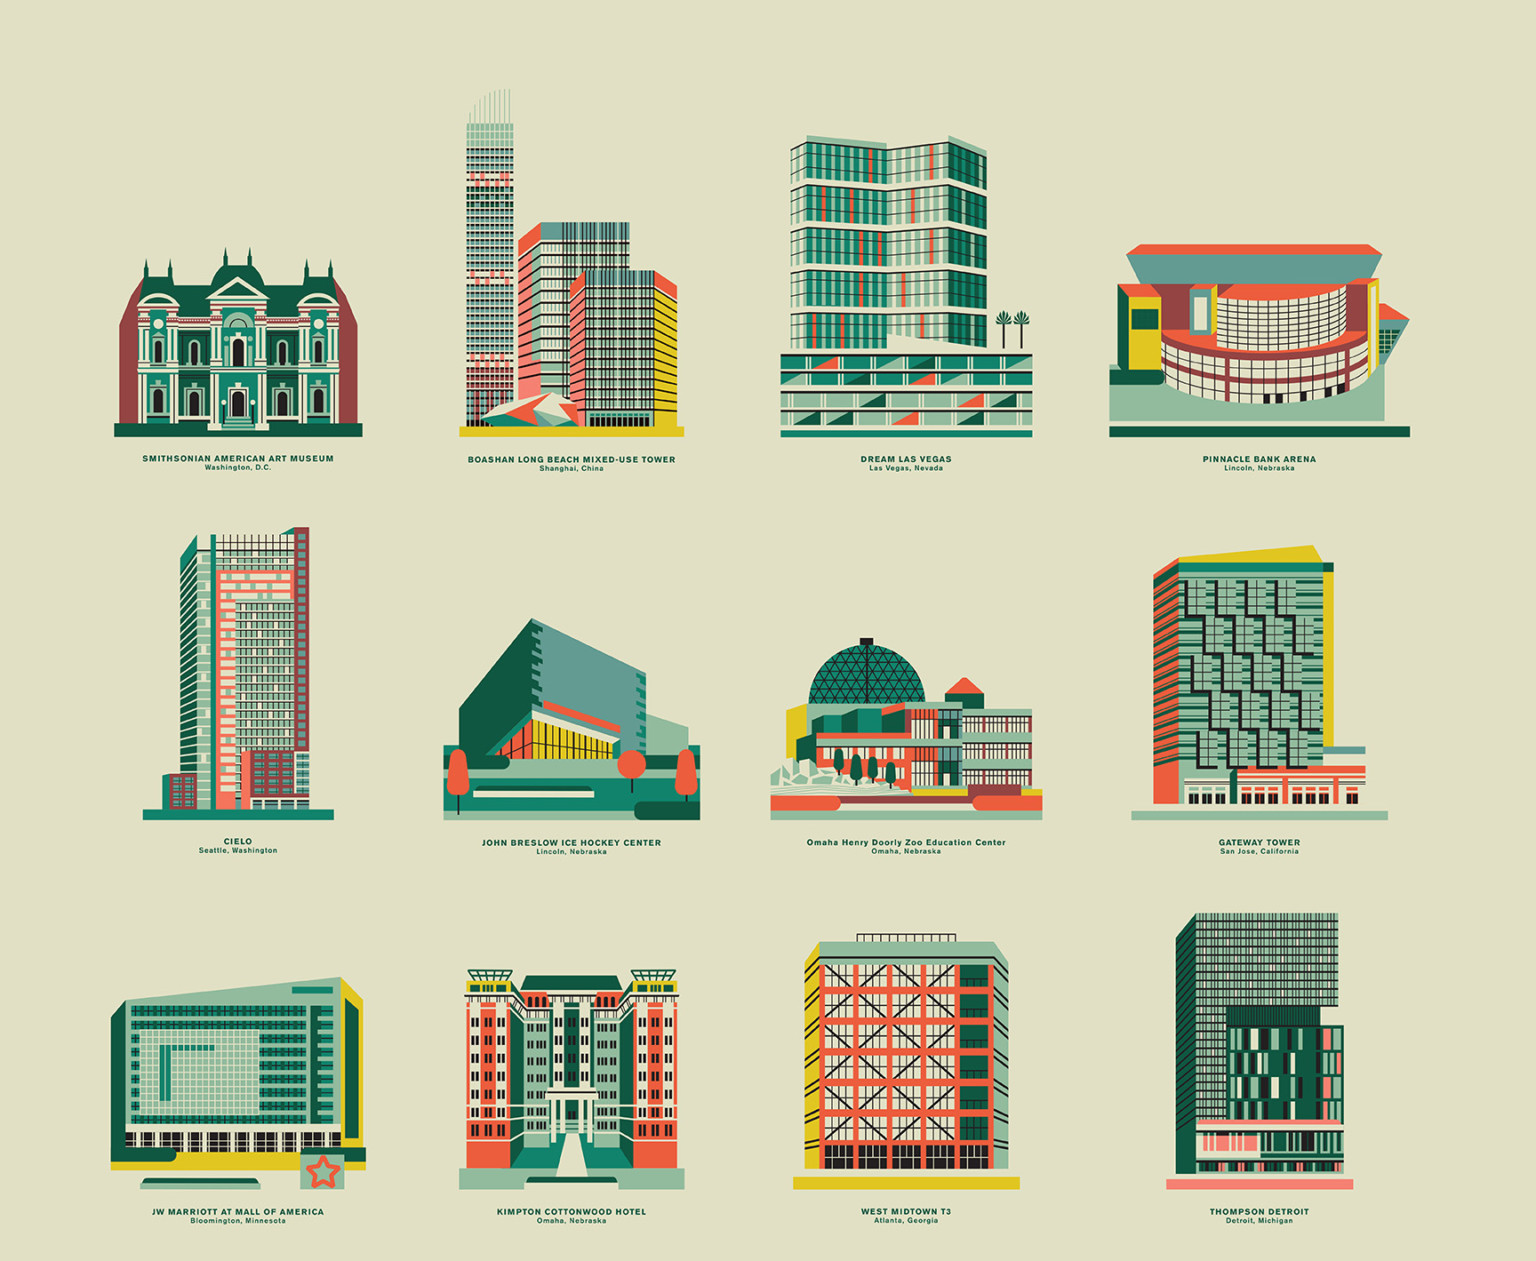 DLR Group poster series ft Seattle Space Neede LA Memorial Coliseum and Thompson Hotel Detroit graphic illustrations